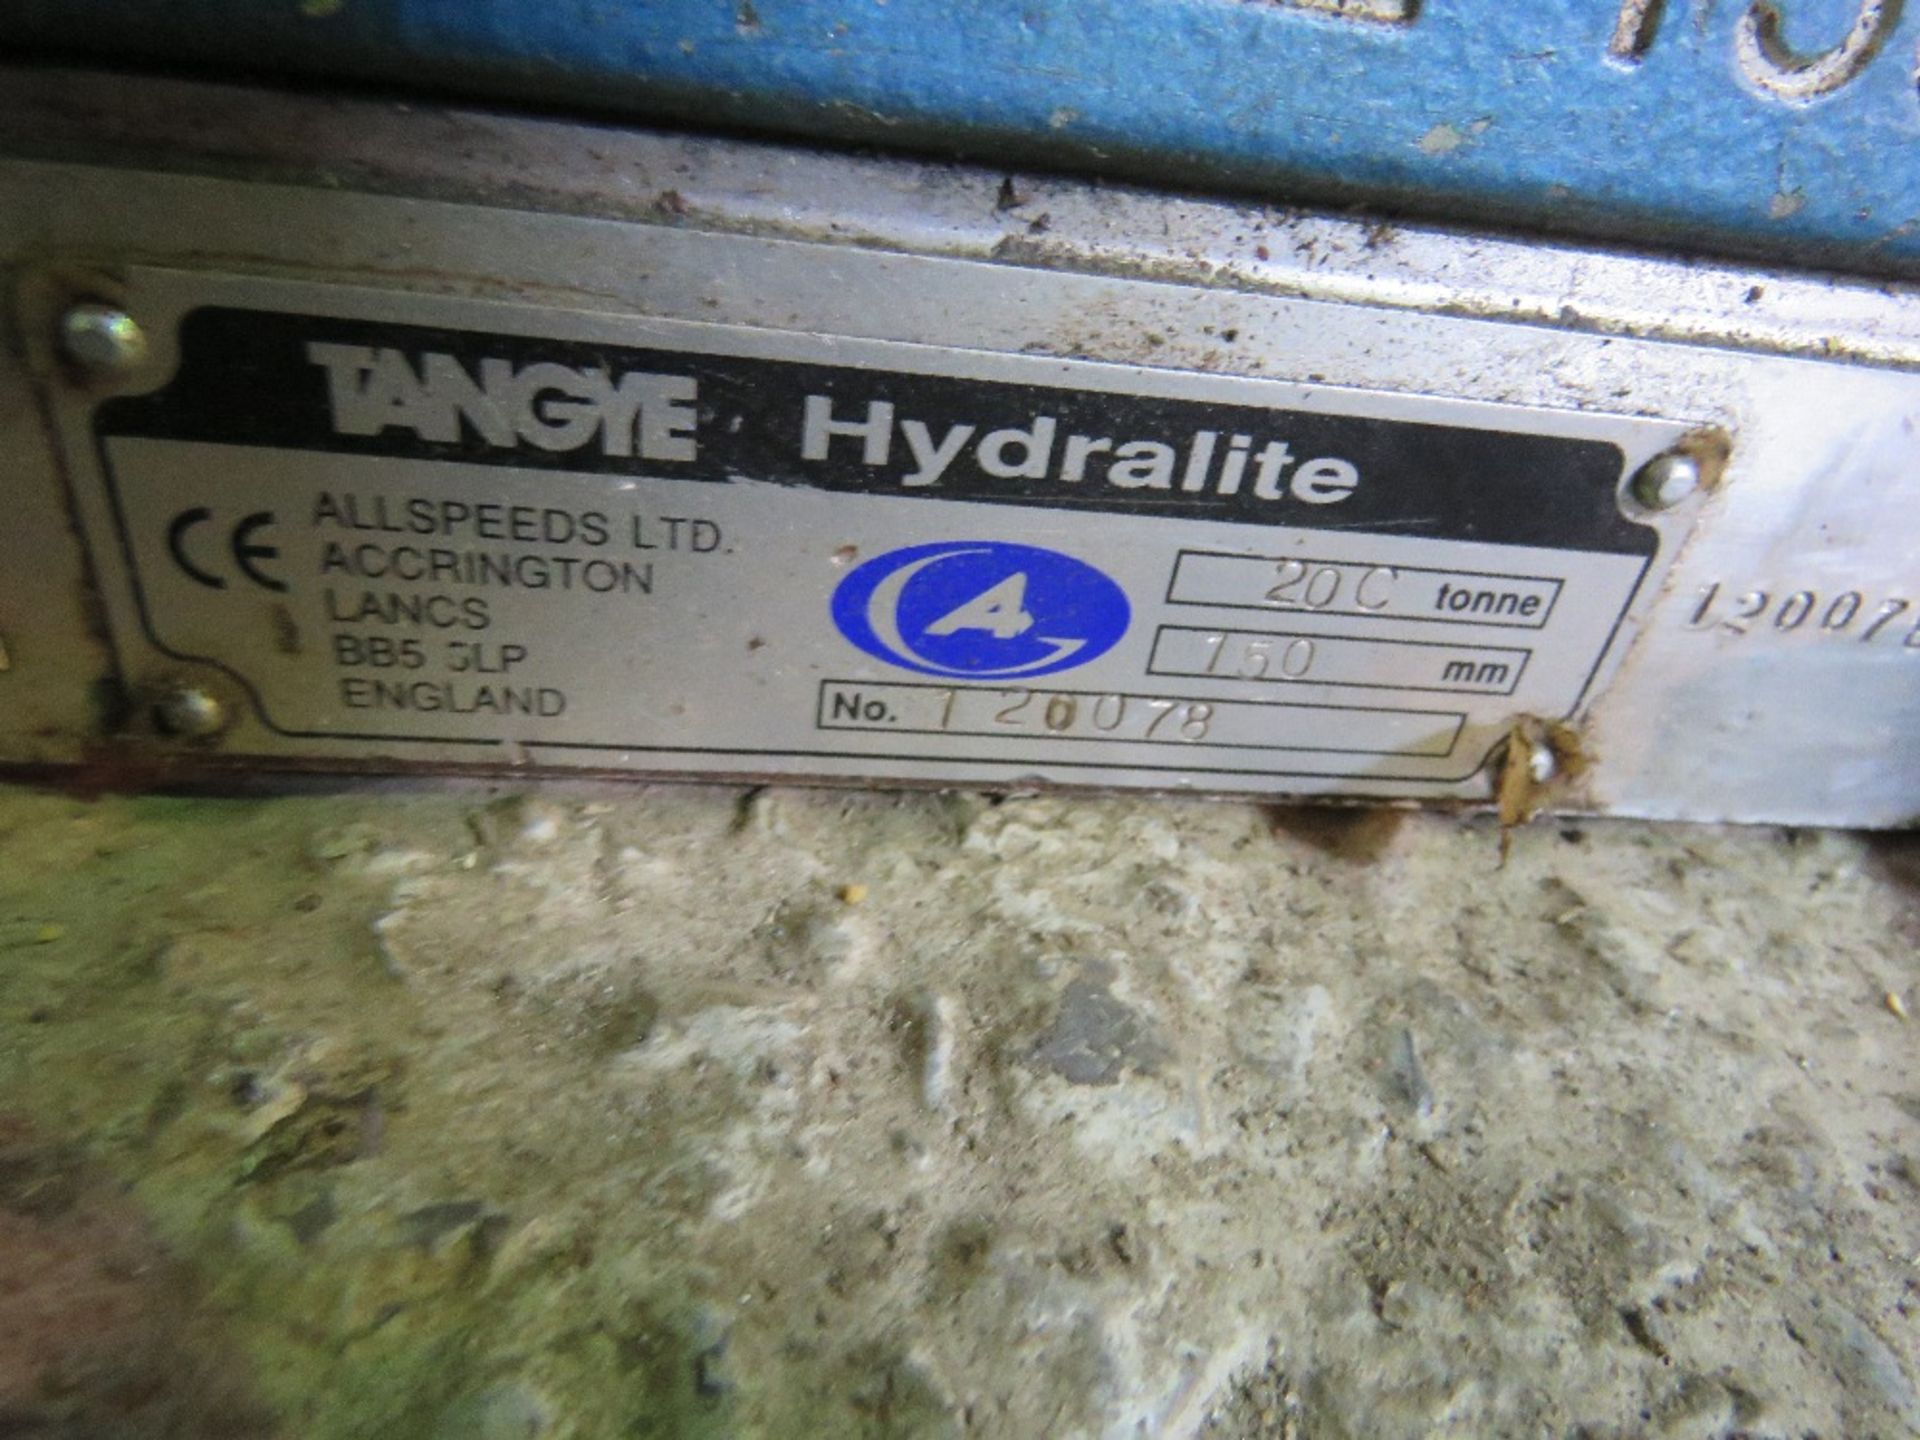 2 X HYDRALITE TANGYE 20TONNE HYDRAULIC JACKS, 150MM RATED LIFT WITH LEVER BARS. THIS LOT IS SOLD - Image 2 of 4